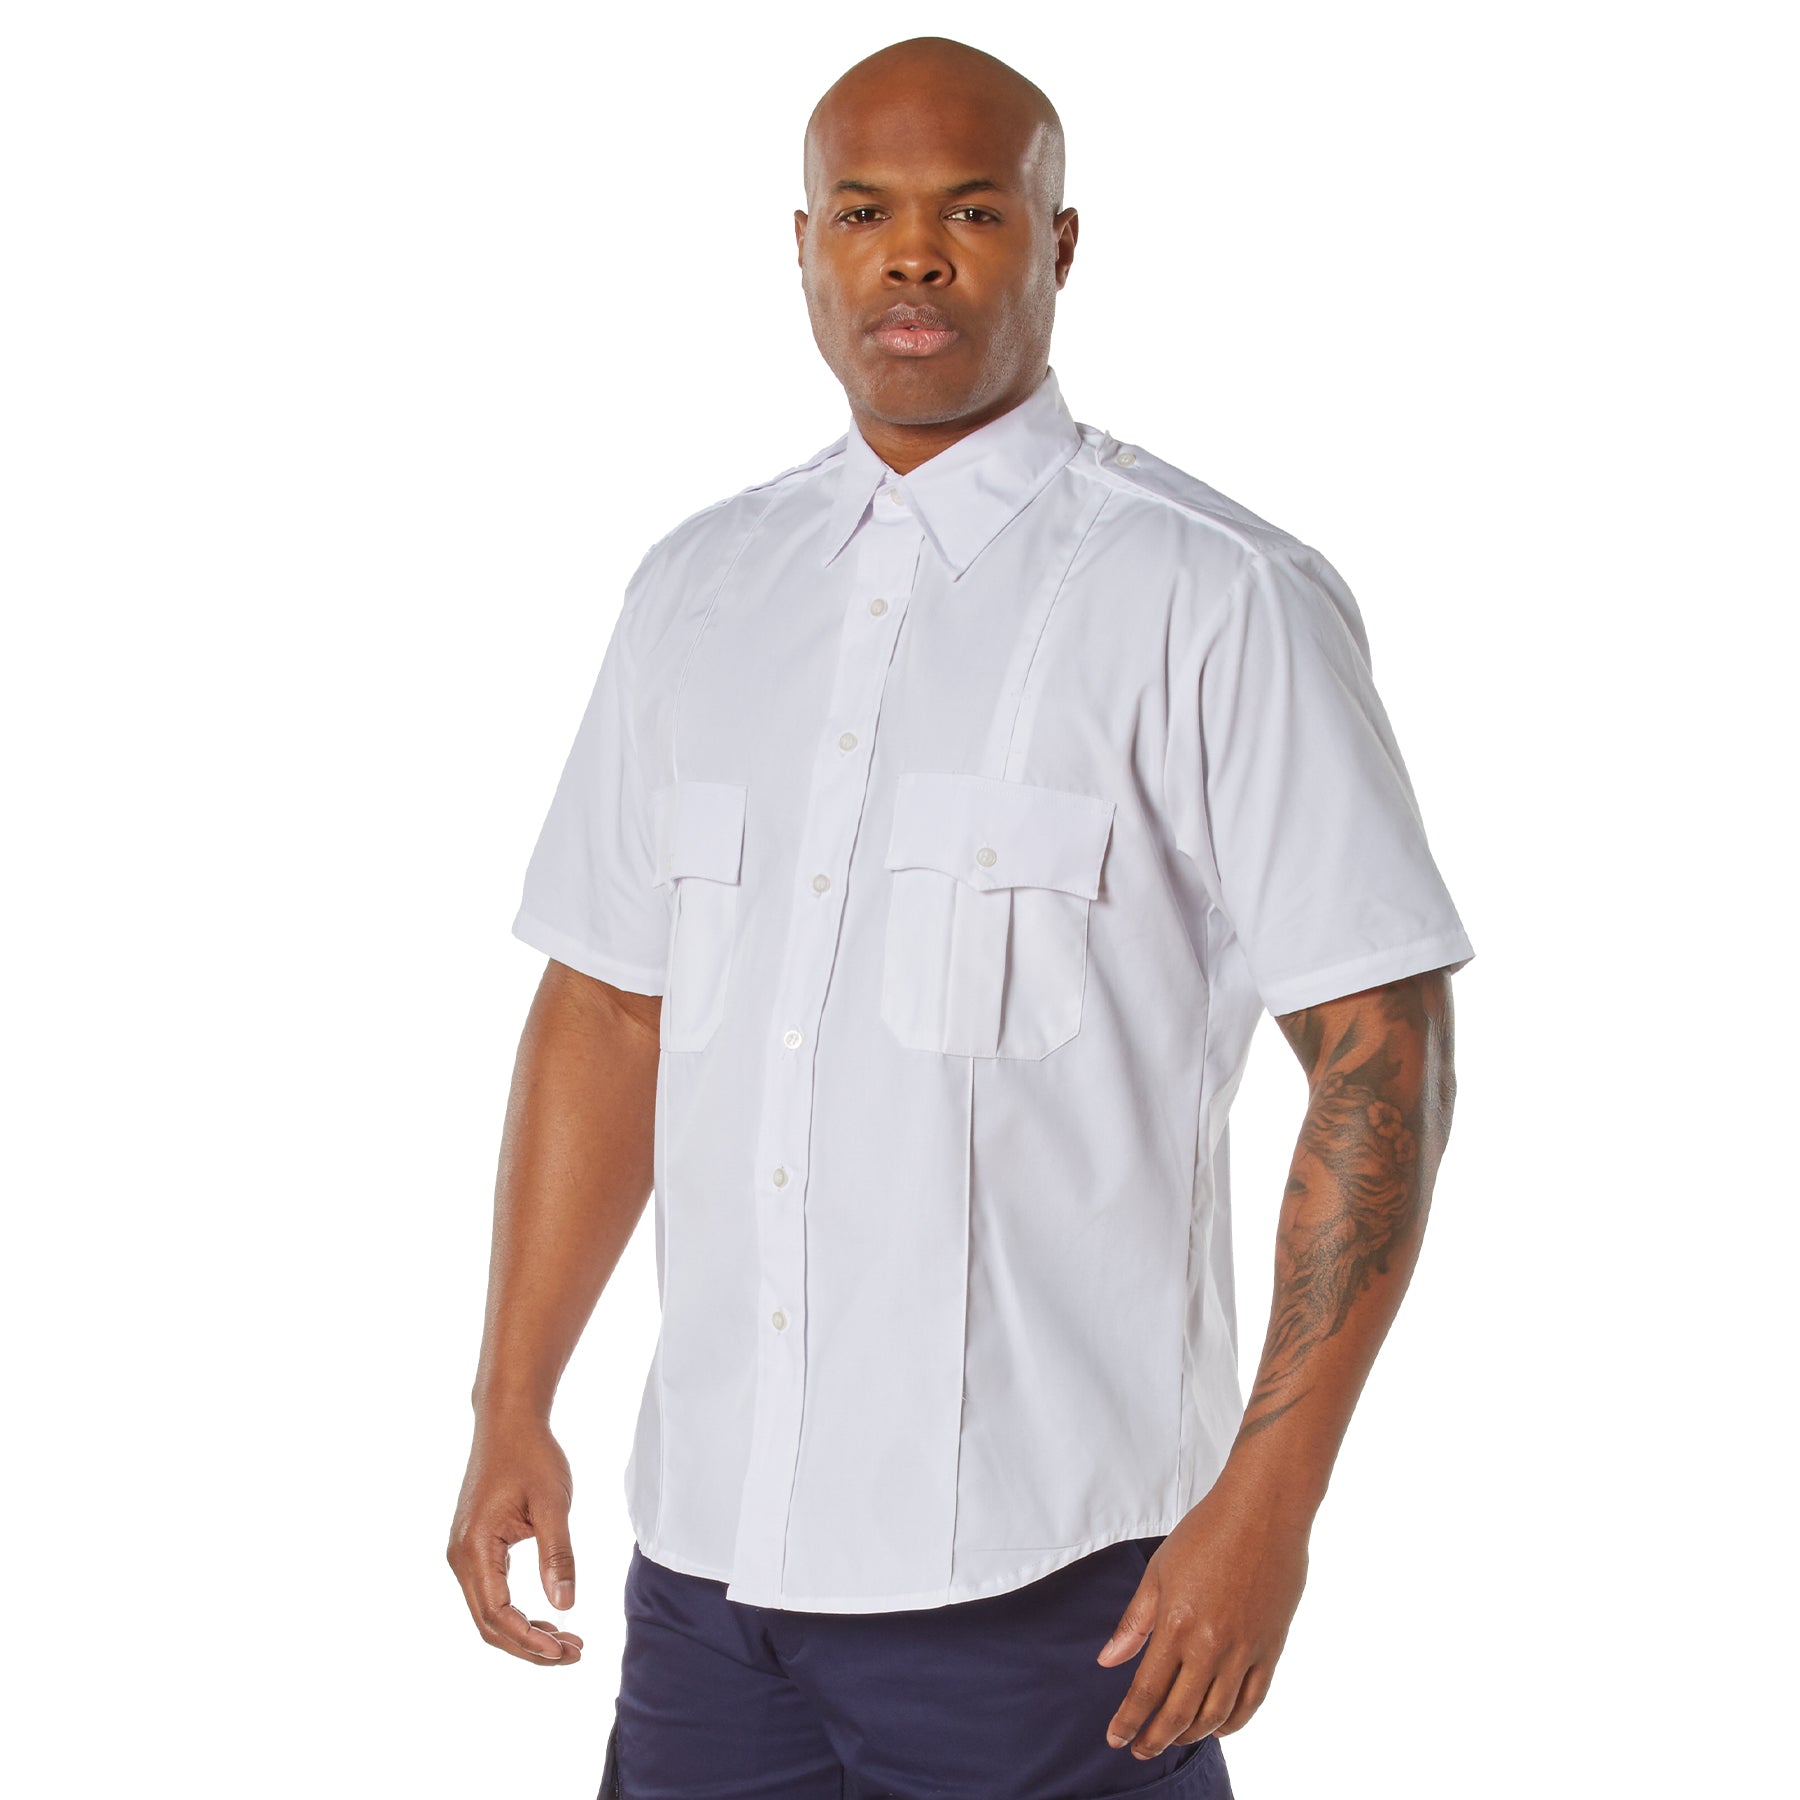 [Public Safety] Poly/Combed Cotton Poplin Weave Police & Security Short-Sleeve Uniform Shirts White